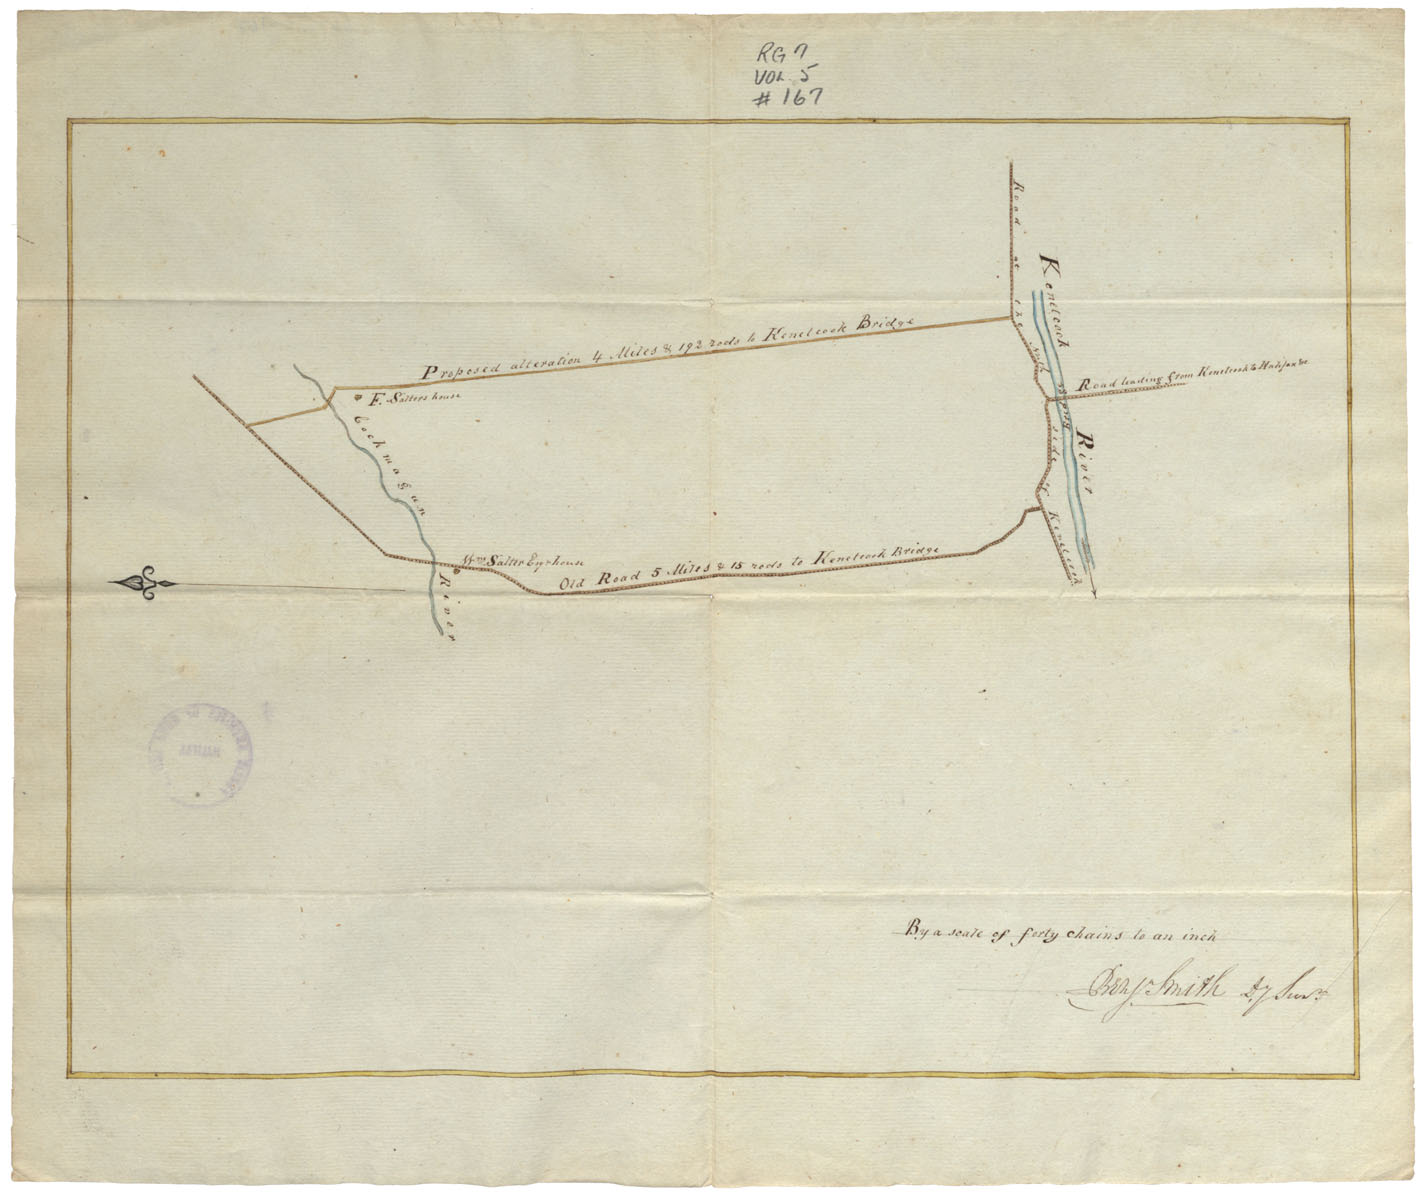 Proposed new road between the Cockmagun River and the Kennetcook R. in Hants County